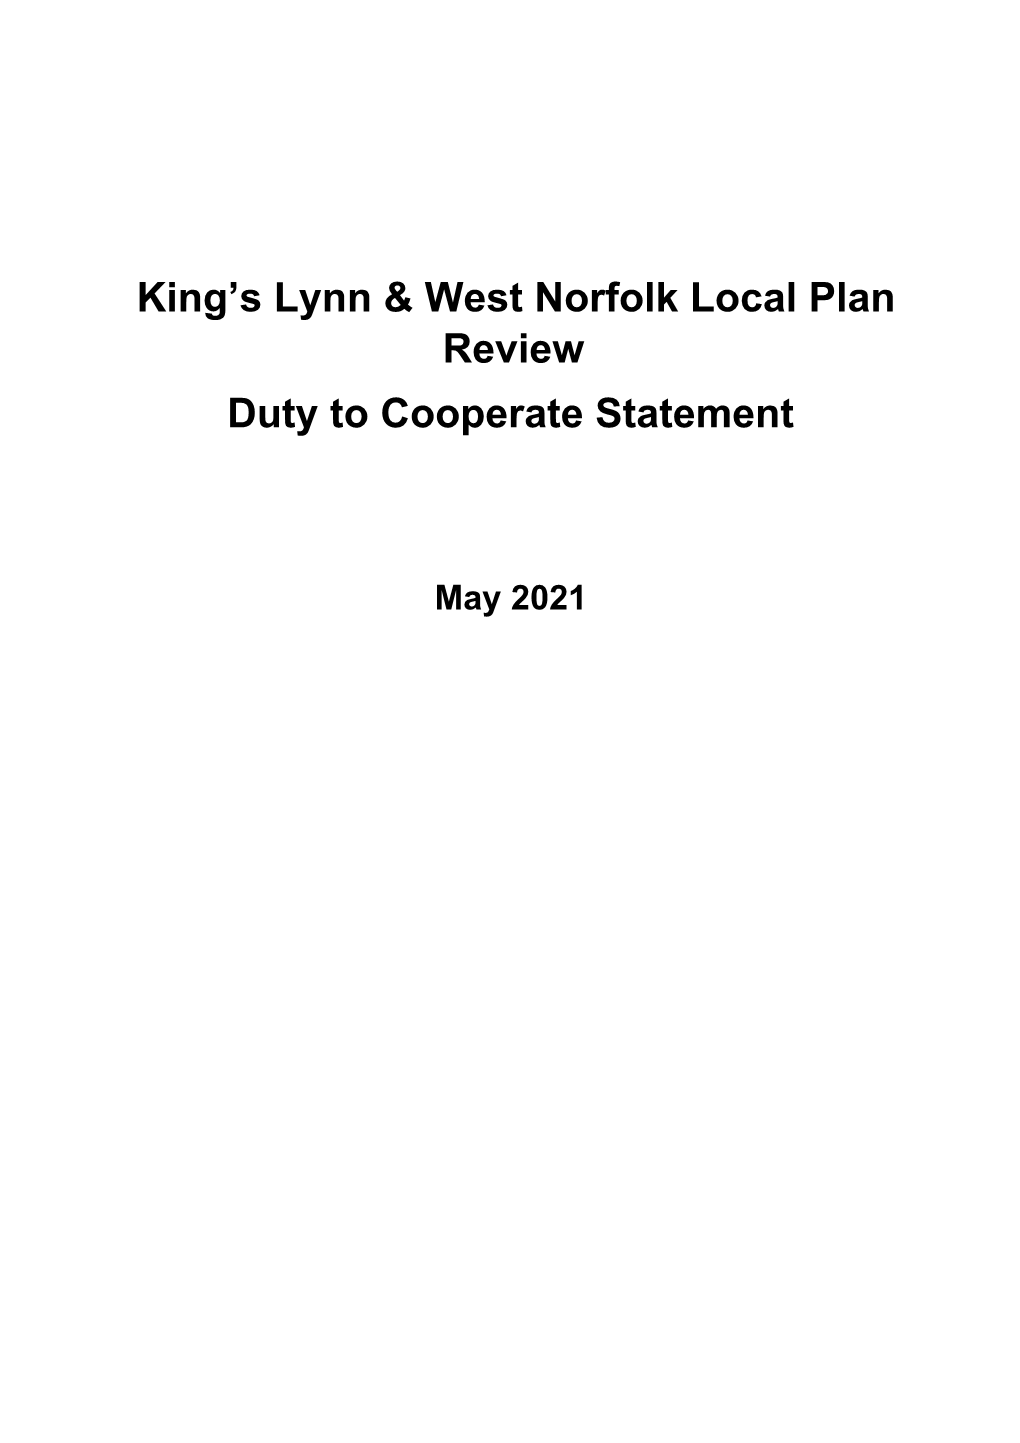 Local Plan Review Duty to Cooperate Statement